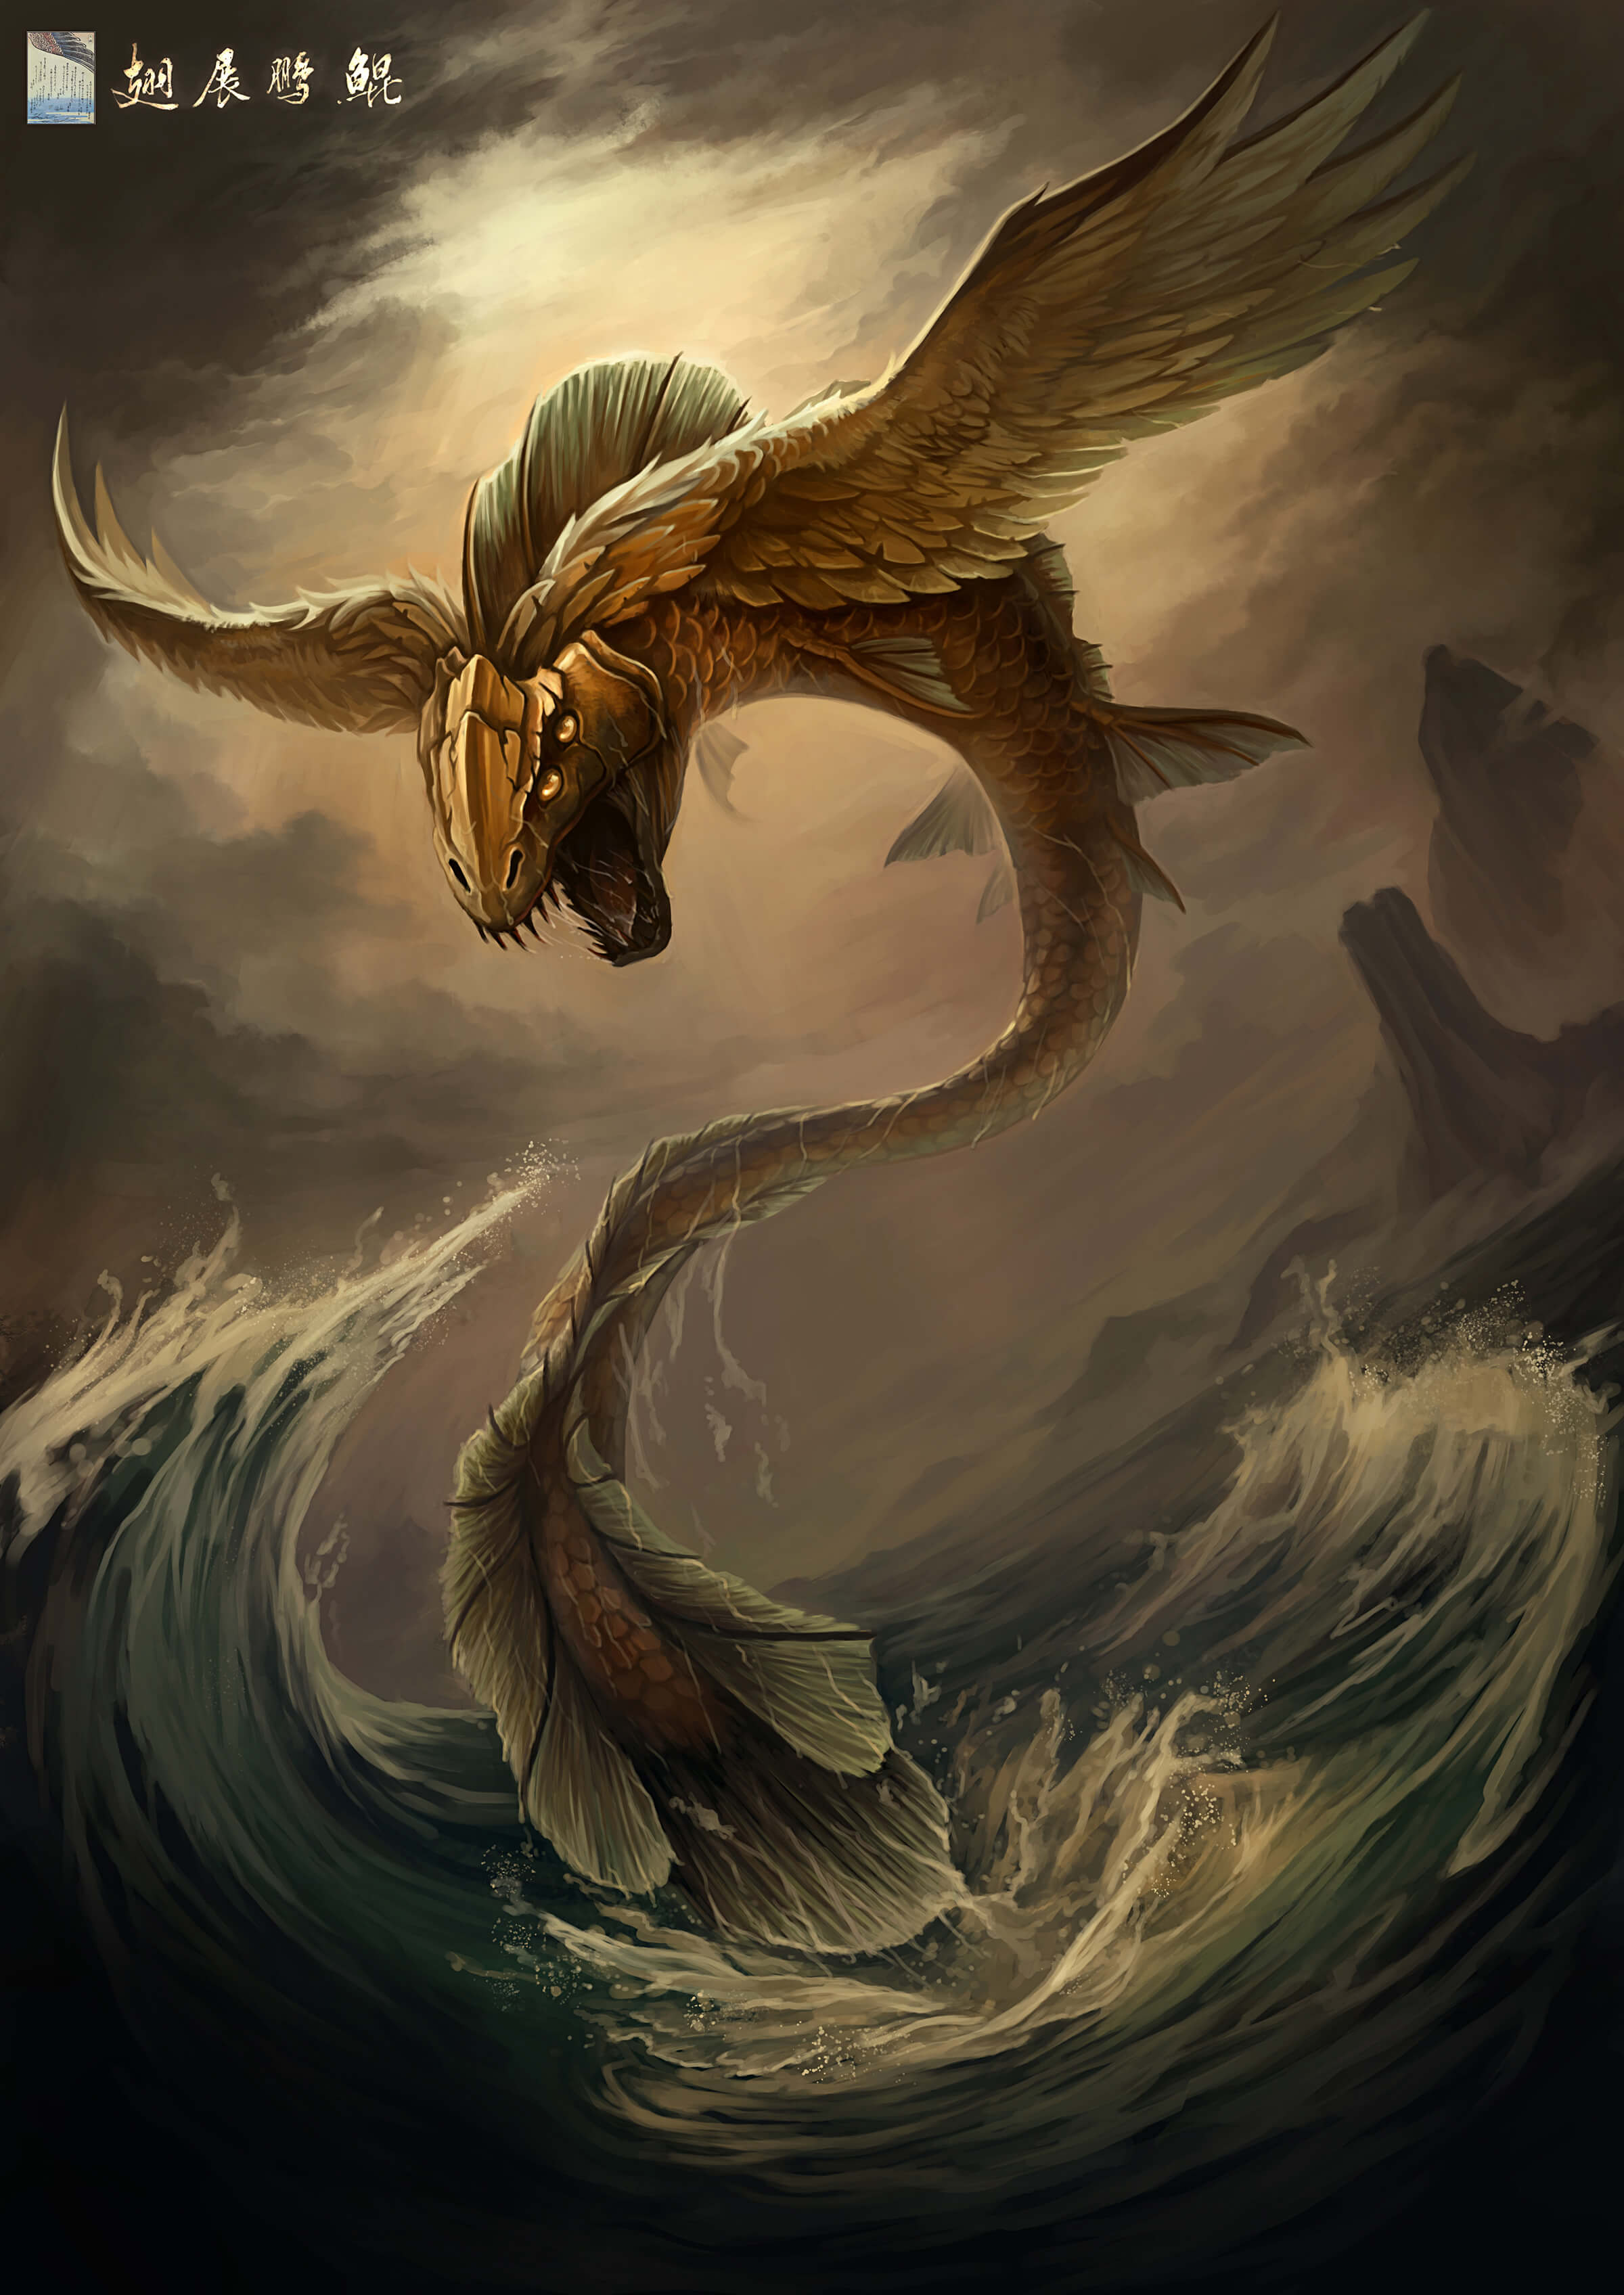 A large, golden, winged fish with four eyes hovers above a dark turbulent sea baring its razor-sharp fangs.